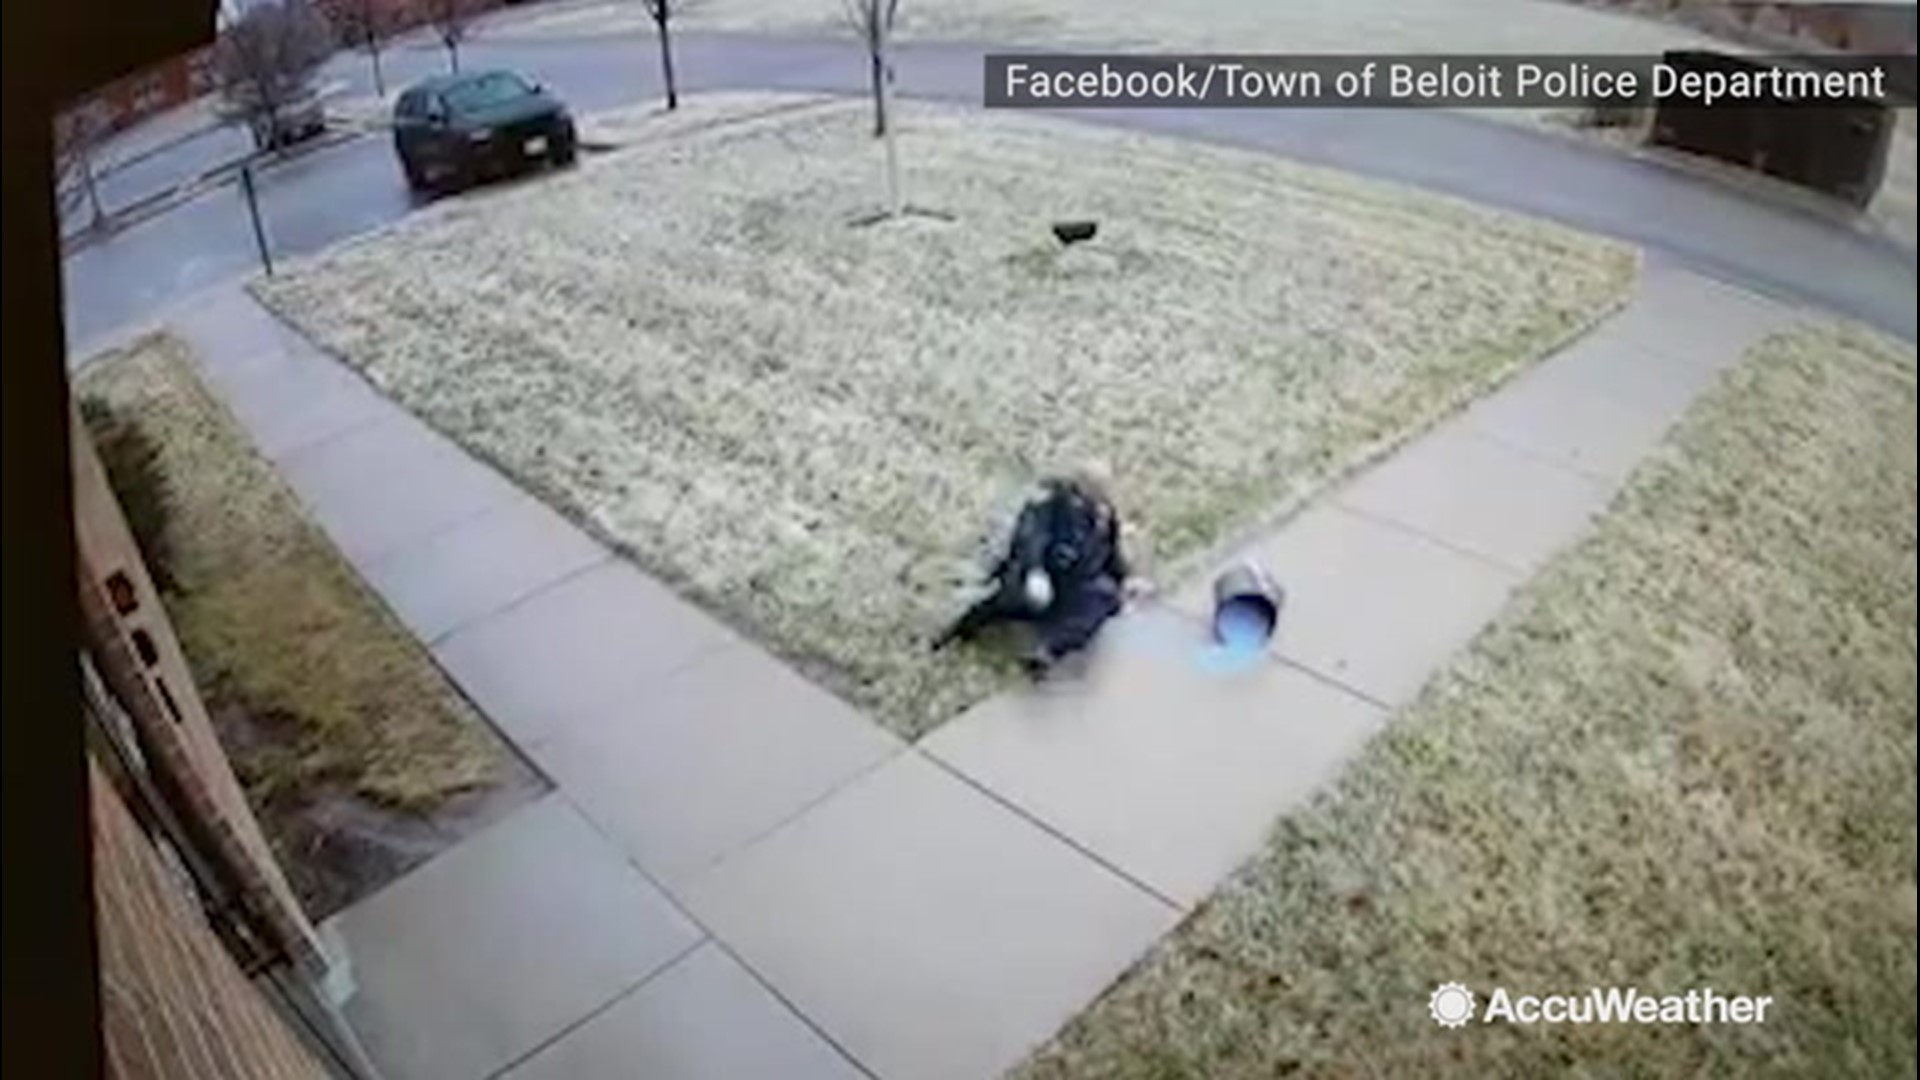 Even the police can have a hard time dealing with ice. Just ask this officer as he tumbled to the ground leaving the station on Jan. 11, in Beloit, Wisconsin.